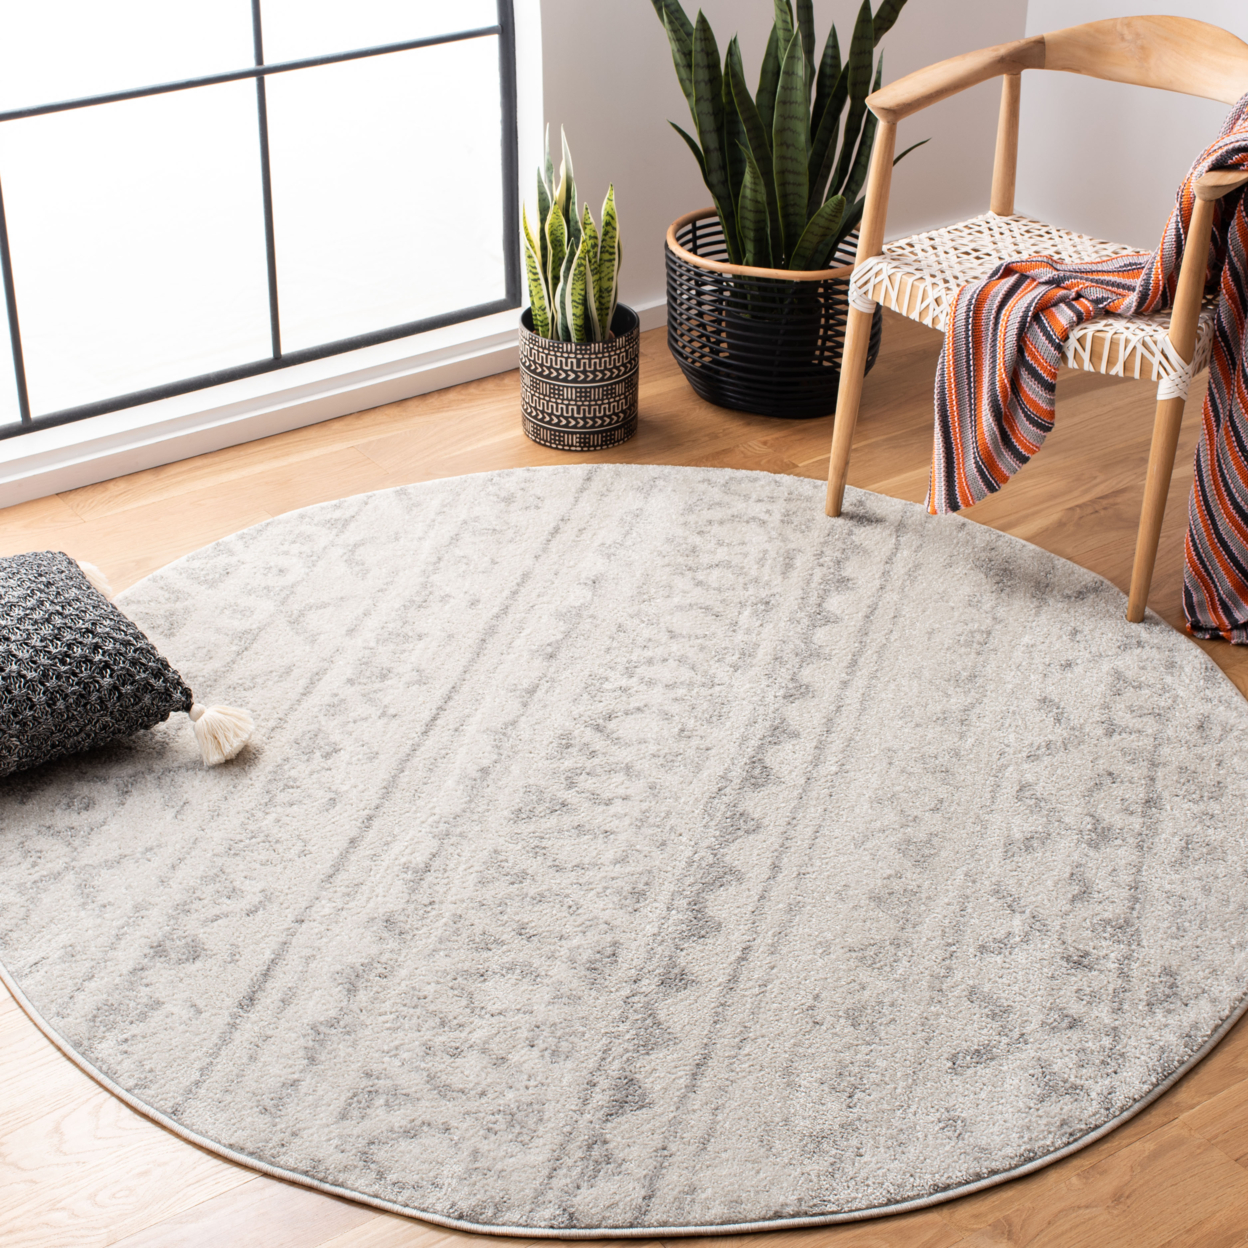 SAFAVIEH Adirondack Collection ADR119A Ivory / Silver Rug - 2' 6 X 10'